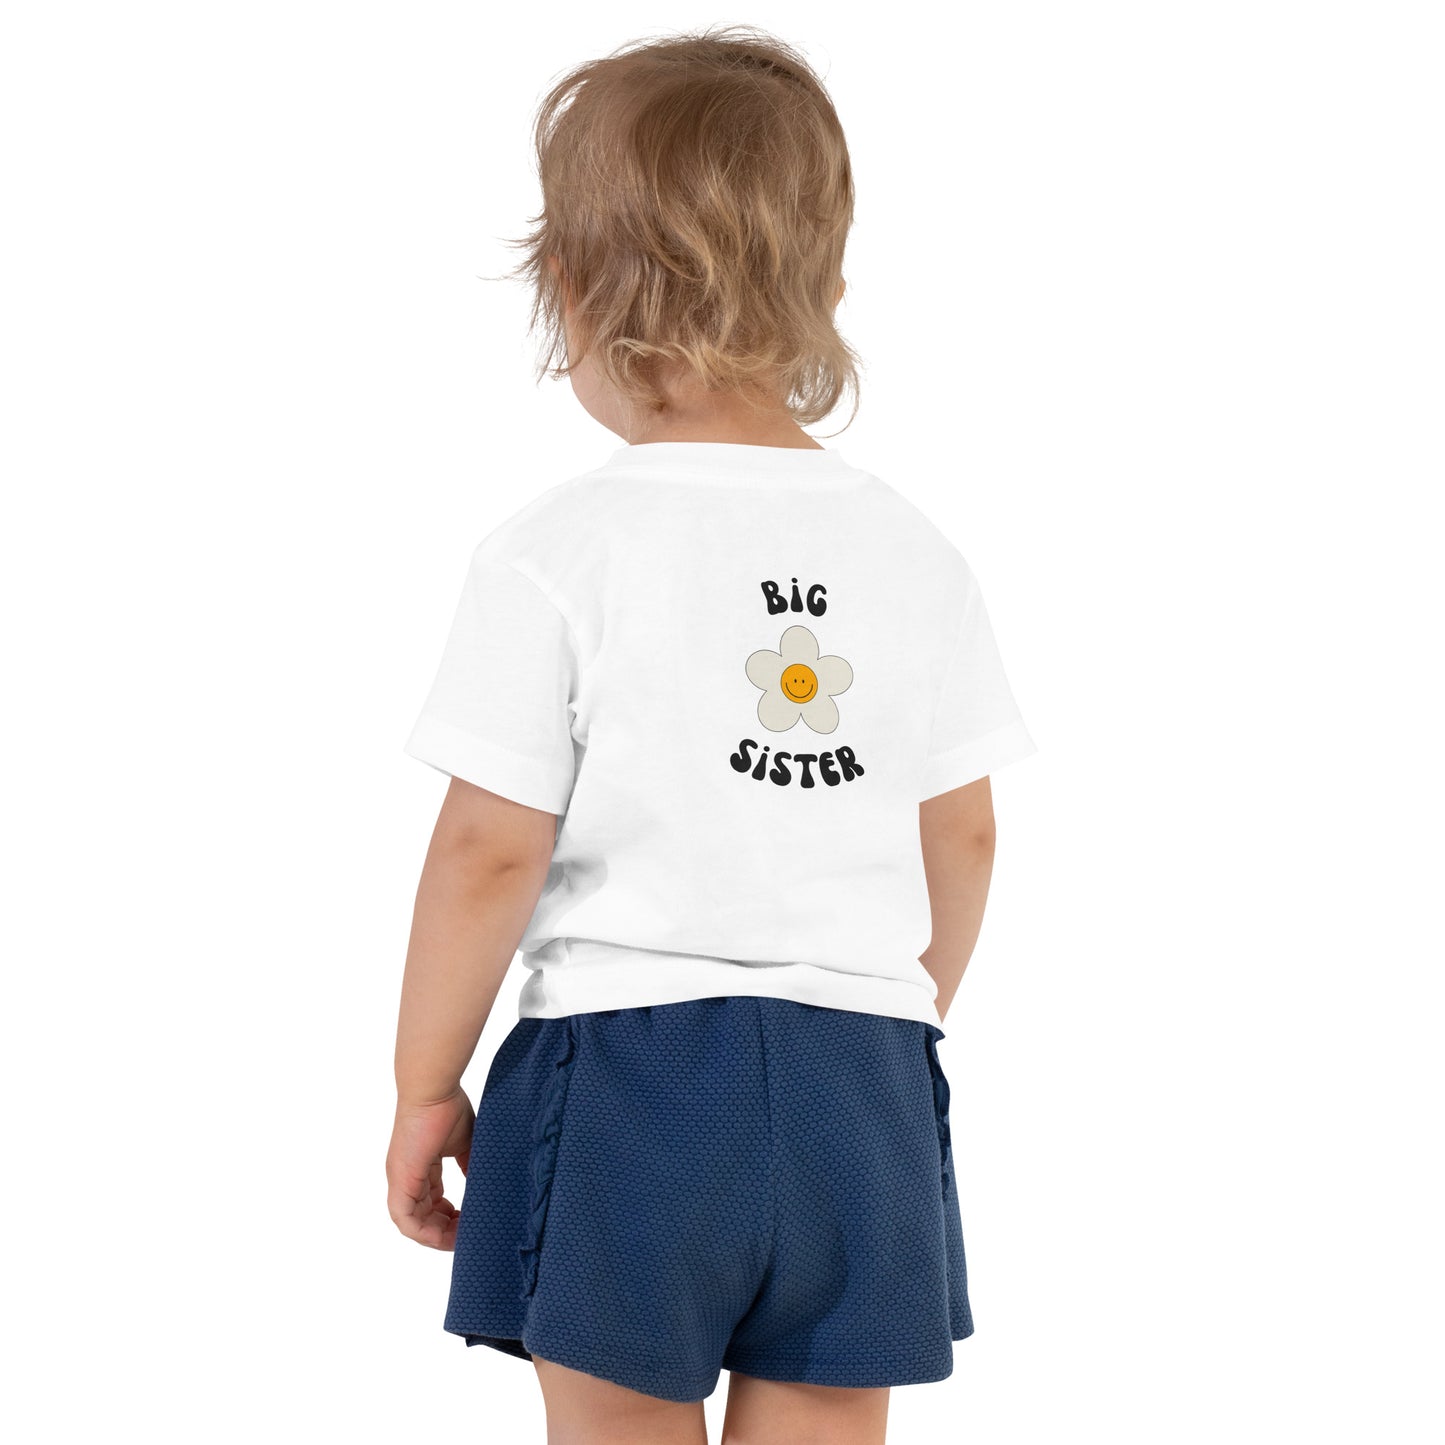 First child toddler tee